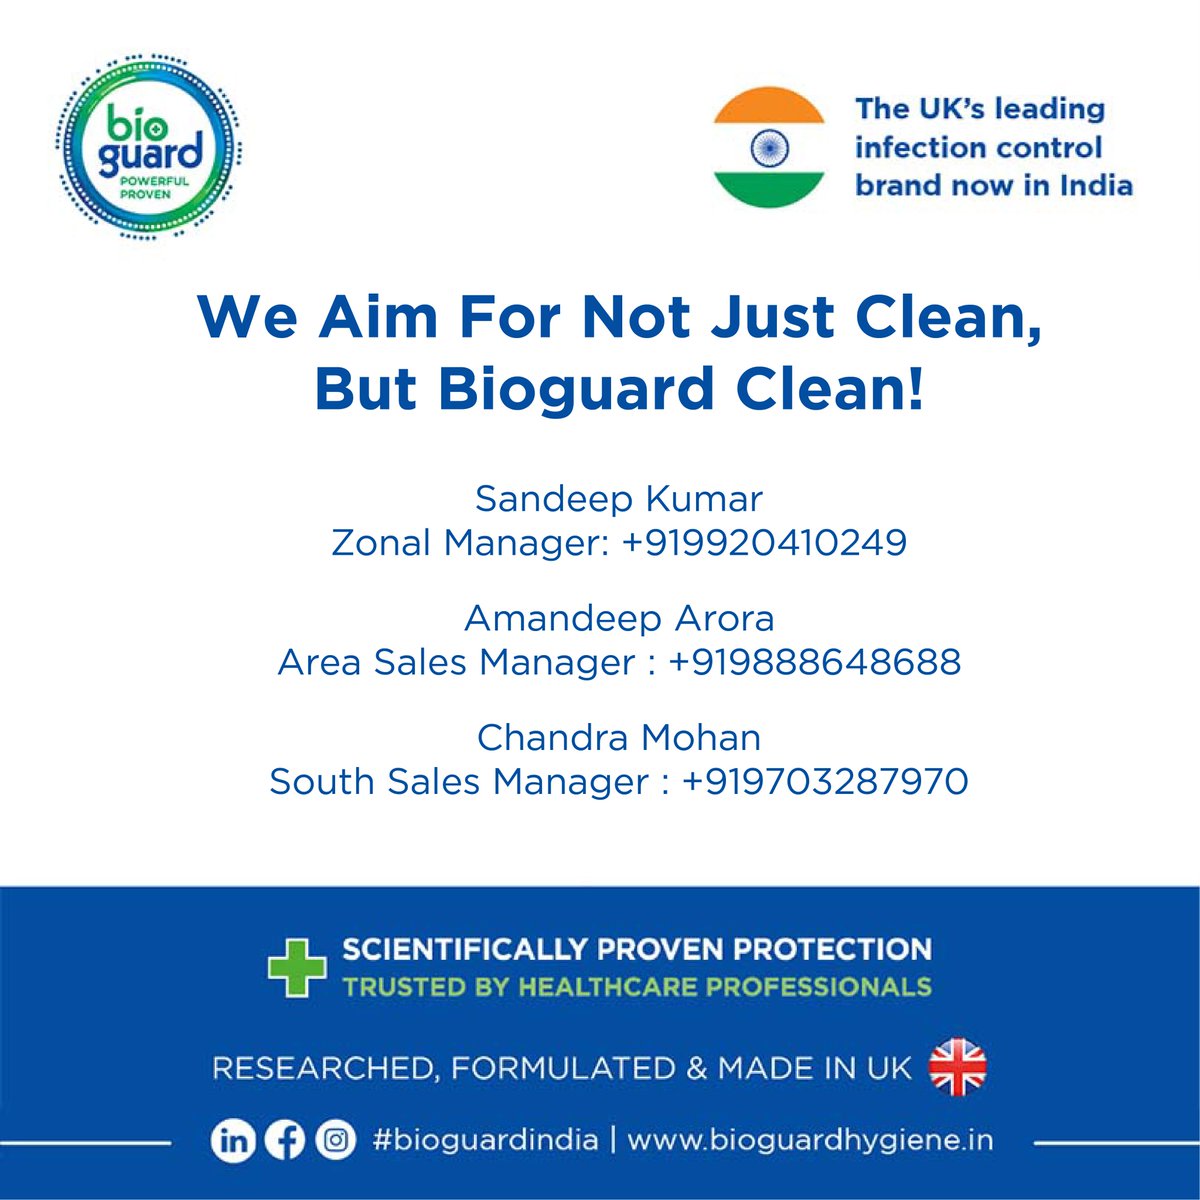 Bioguard health care professionals took the initiative of imparting recommended protocols at #CardinalGracias #Hospital.

Be Smart. Choose #Bioguard

#bioguardhygiene #pathogens #infection #diseases #NosocomialInfections #reduceinfectionrisks  #mumbai #trainingsession #doctors